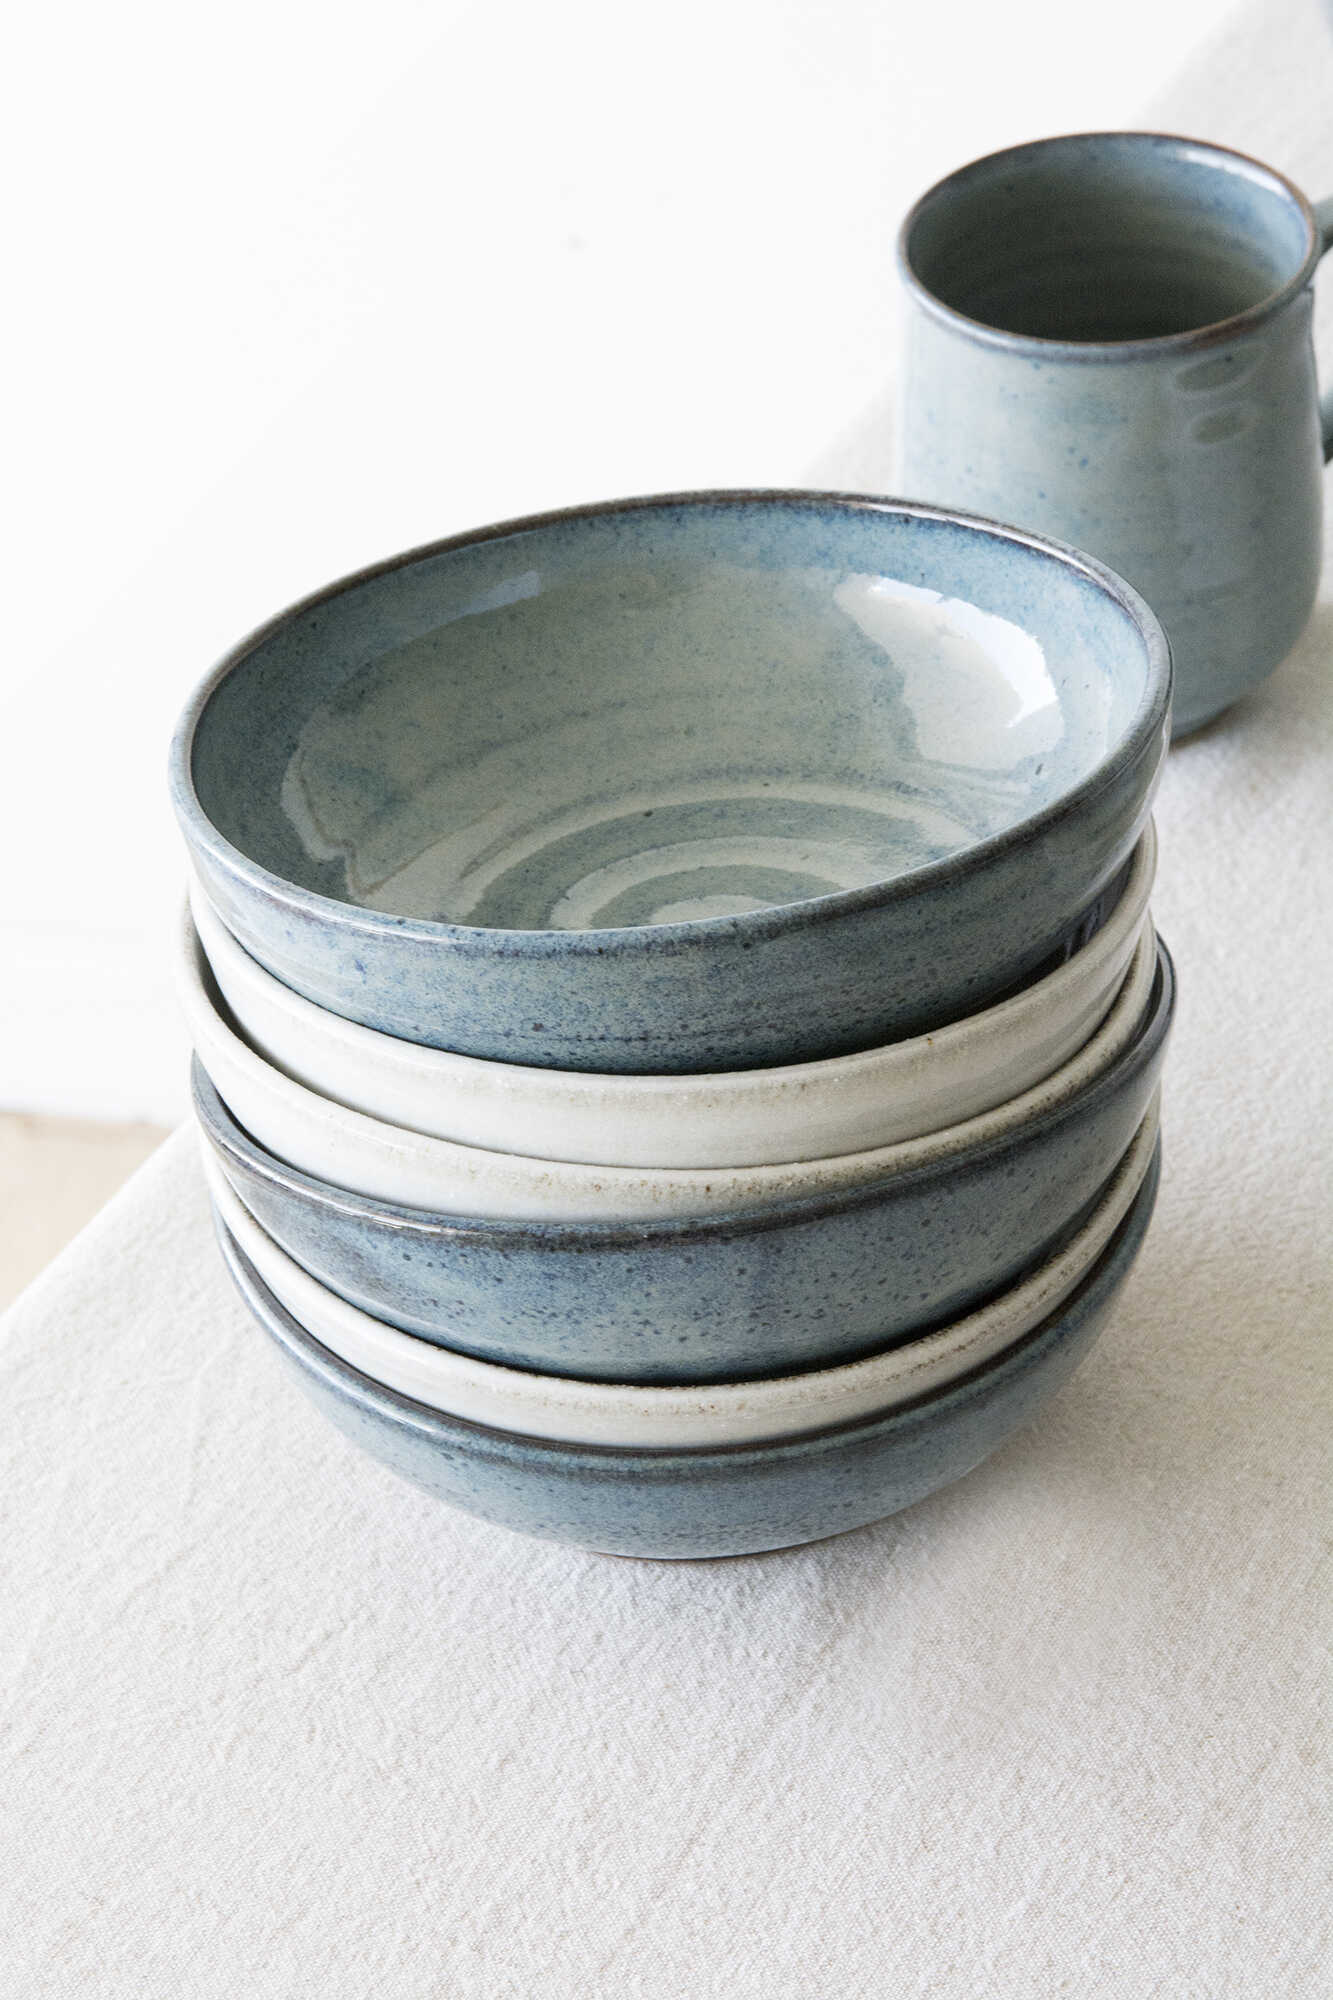 Stackable Ceramic Bowls - Mad About Pottery- Bowl